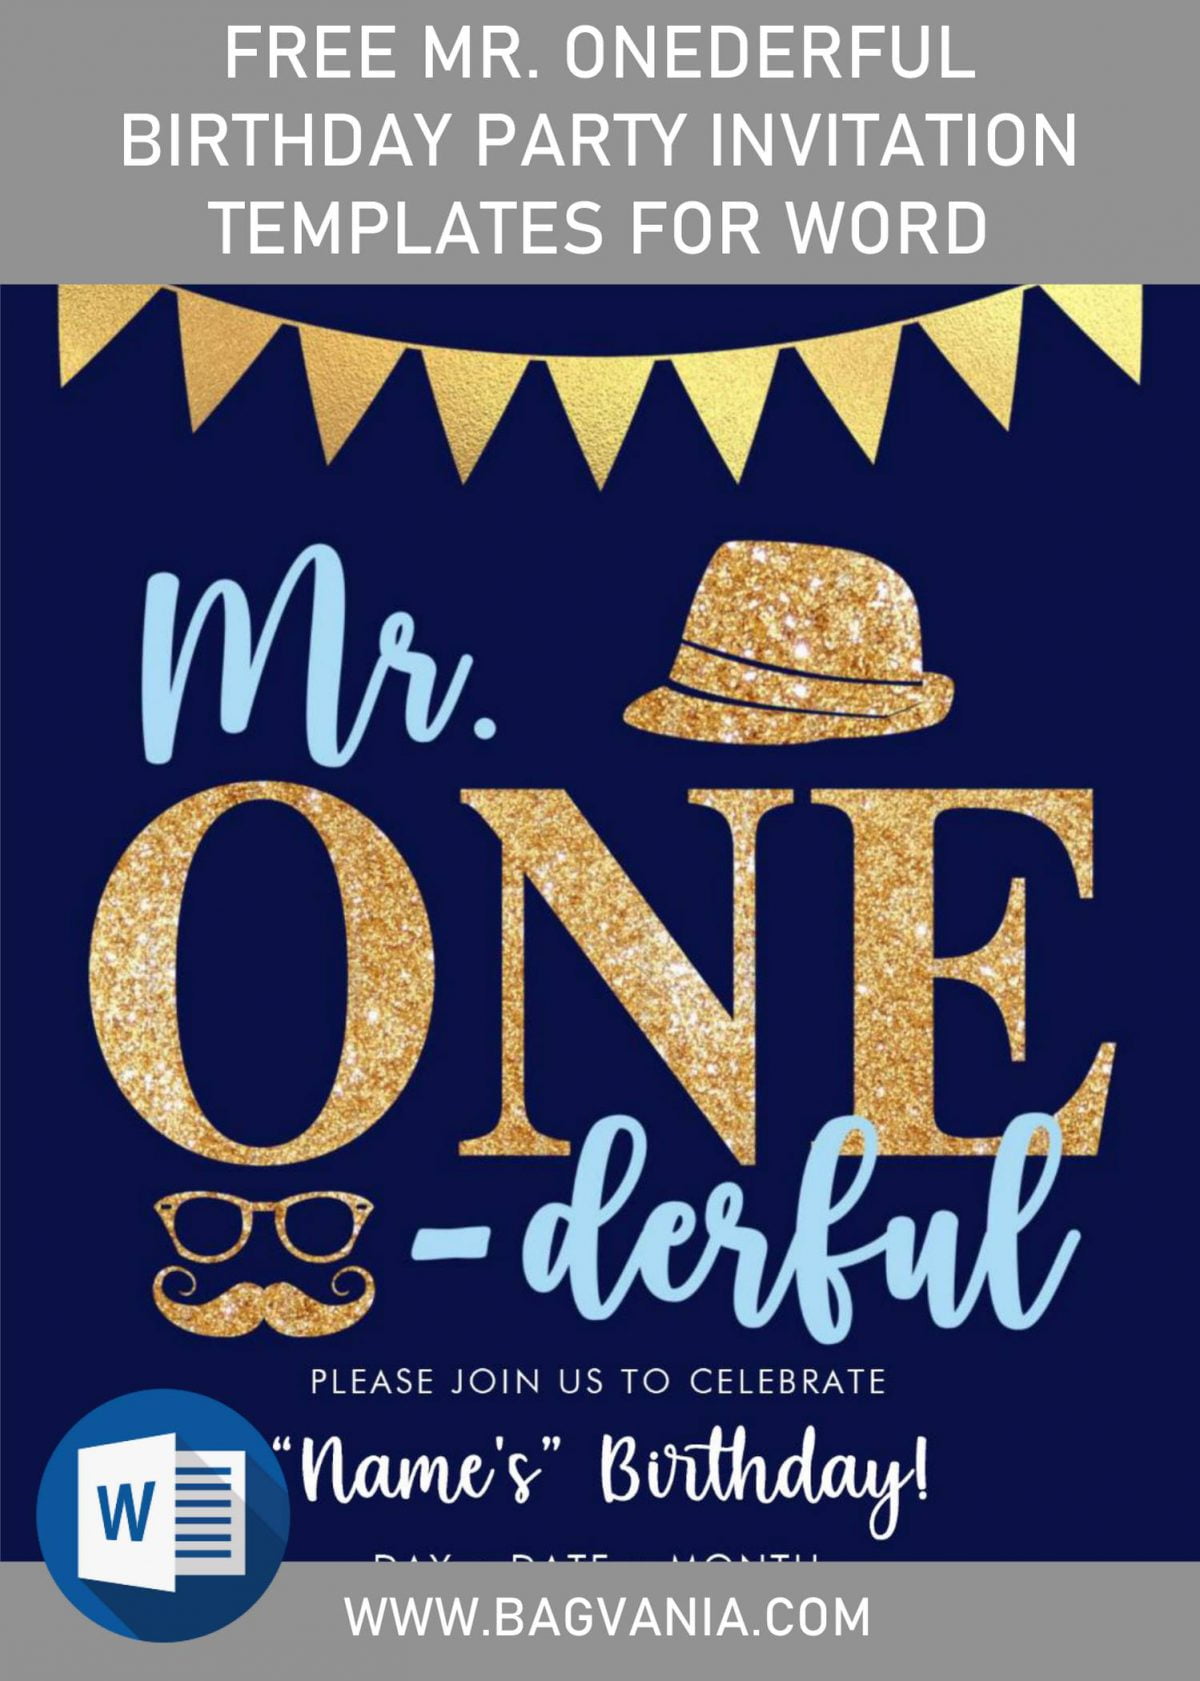 Free Mr. Onederful Birthday Party Invitation Templates For Word